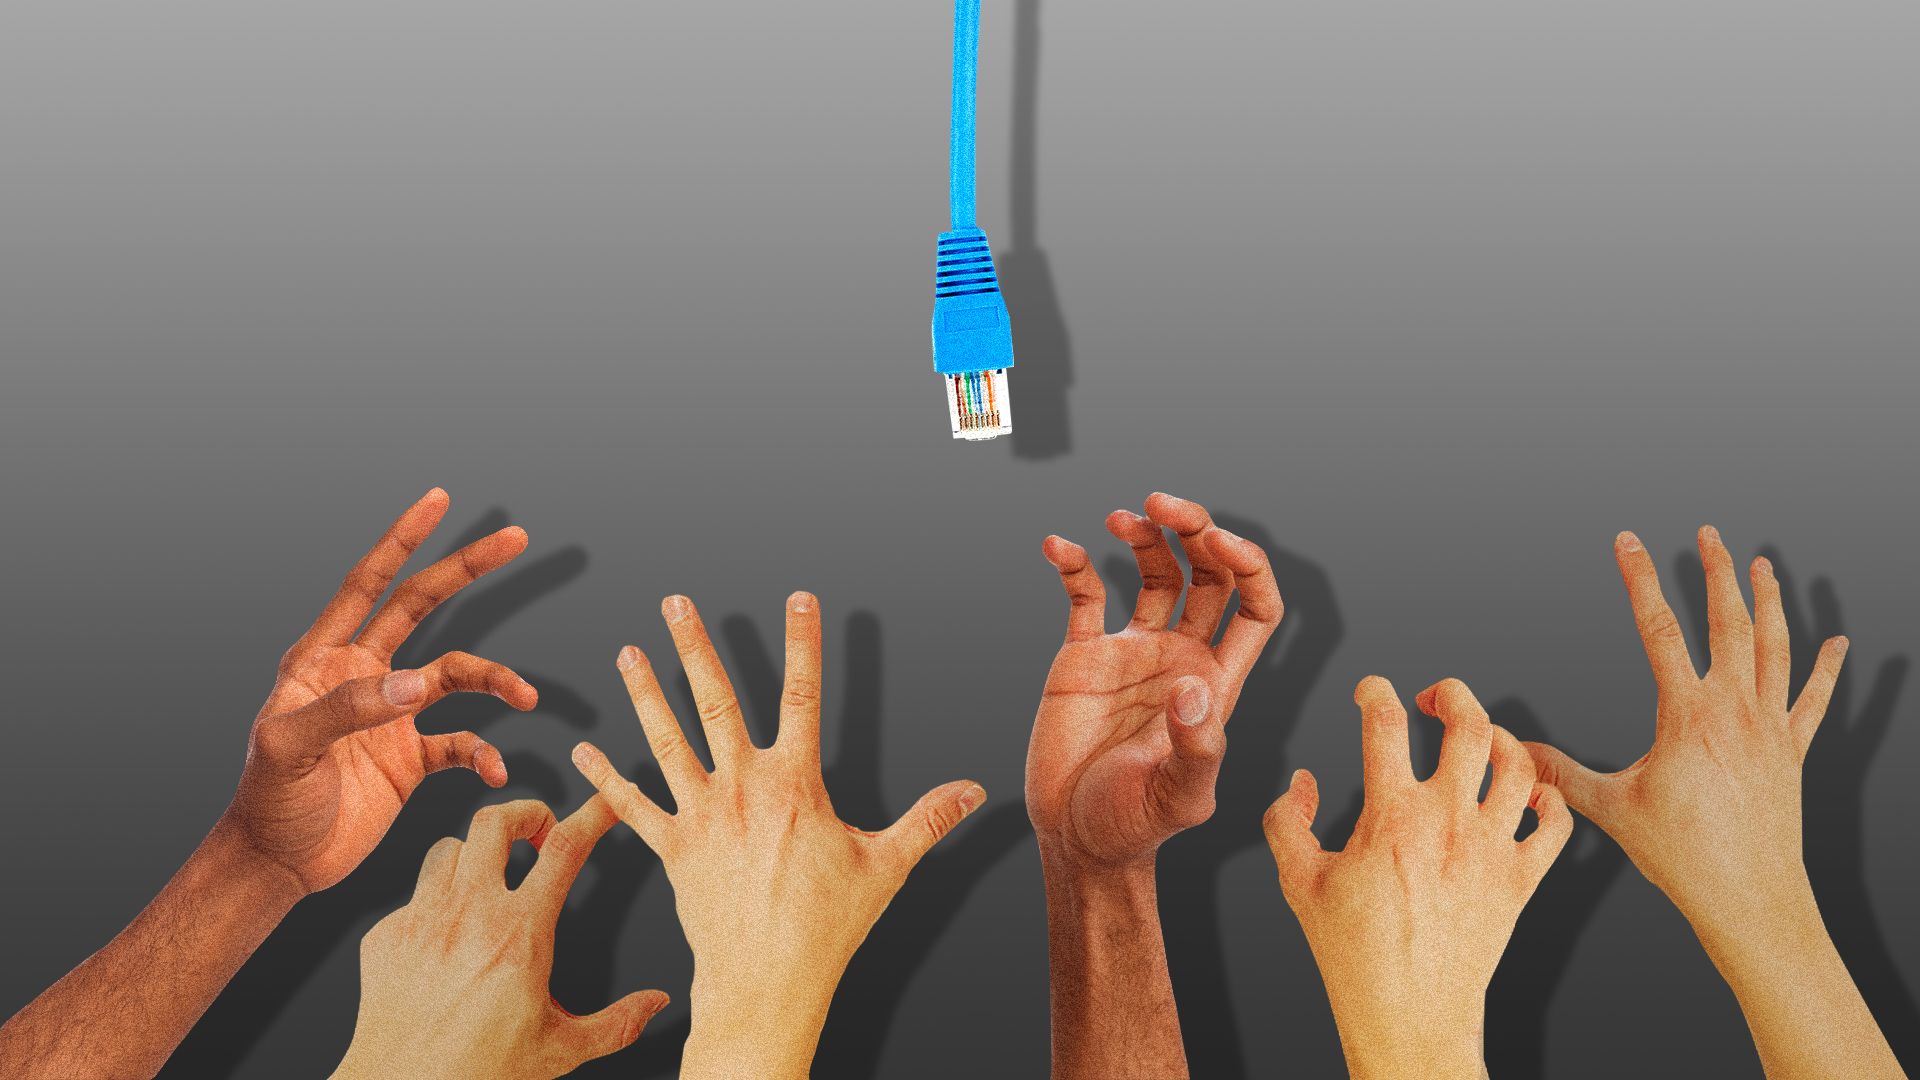 Illustration of hands reaching up to a dangling Ethernet cable.